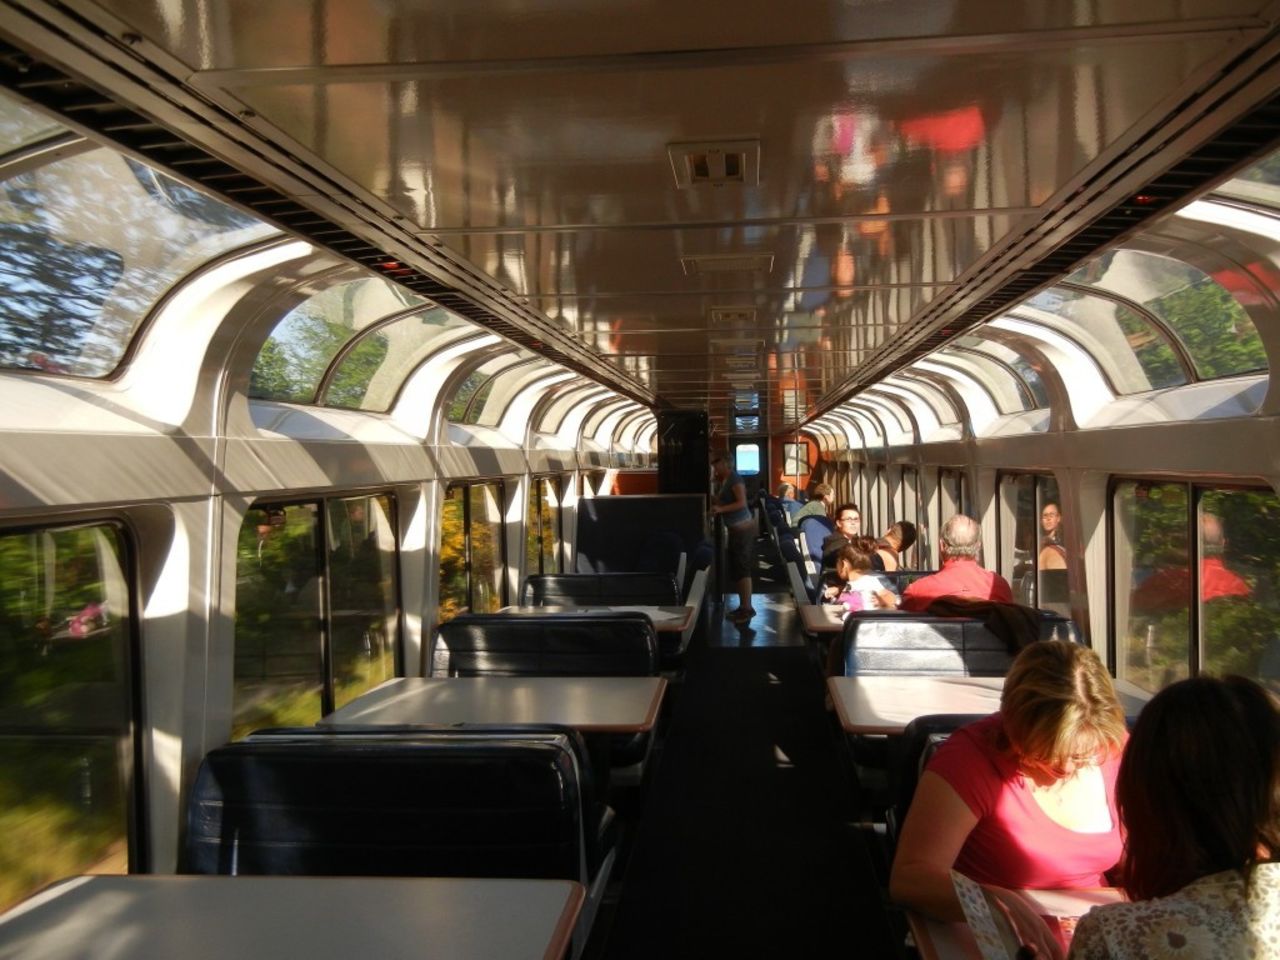 Amtrak officially rolls out writers' residency CNN